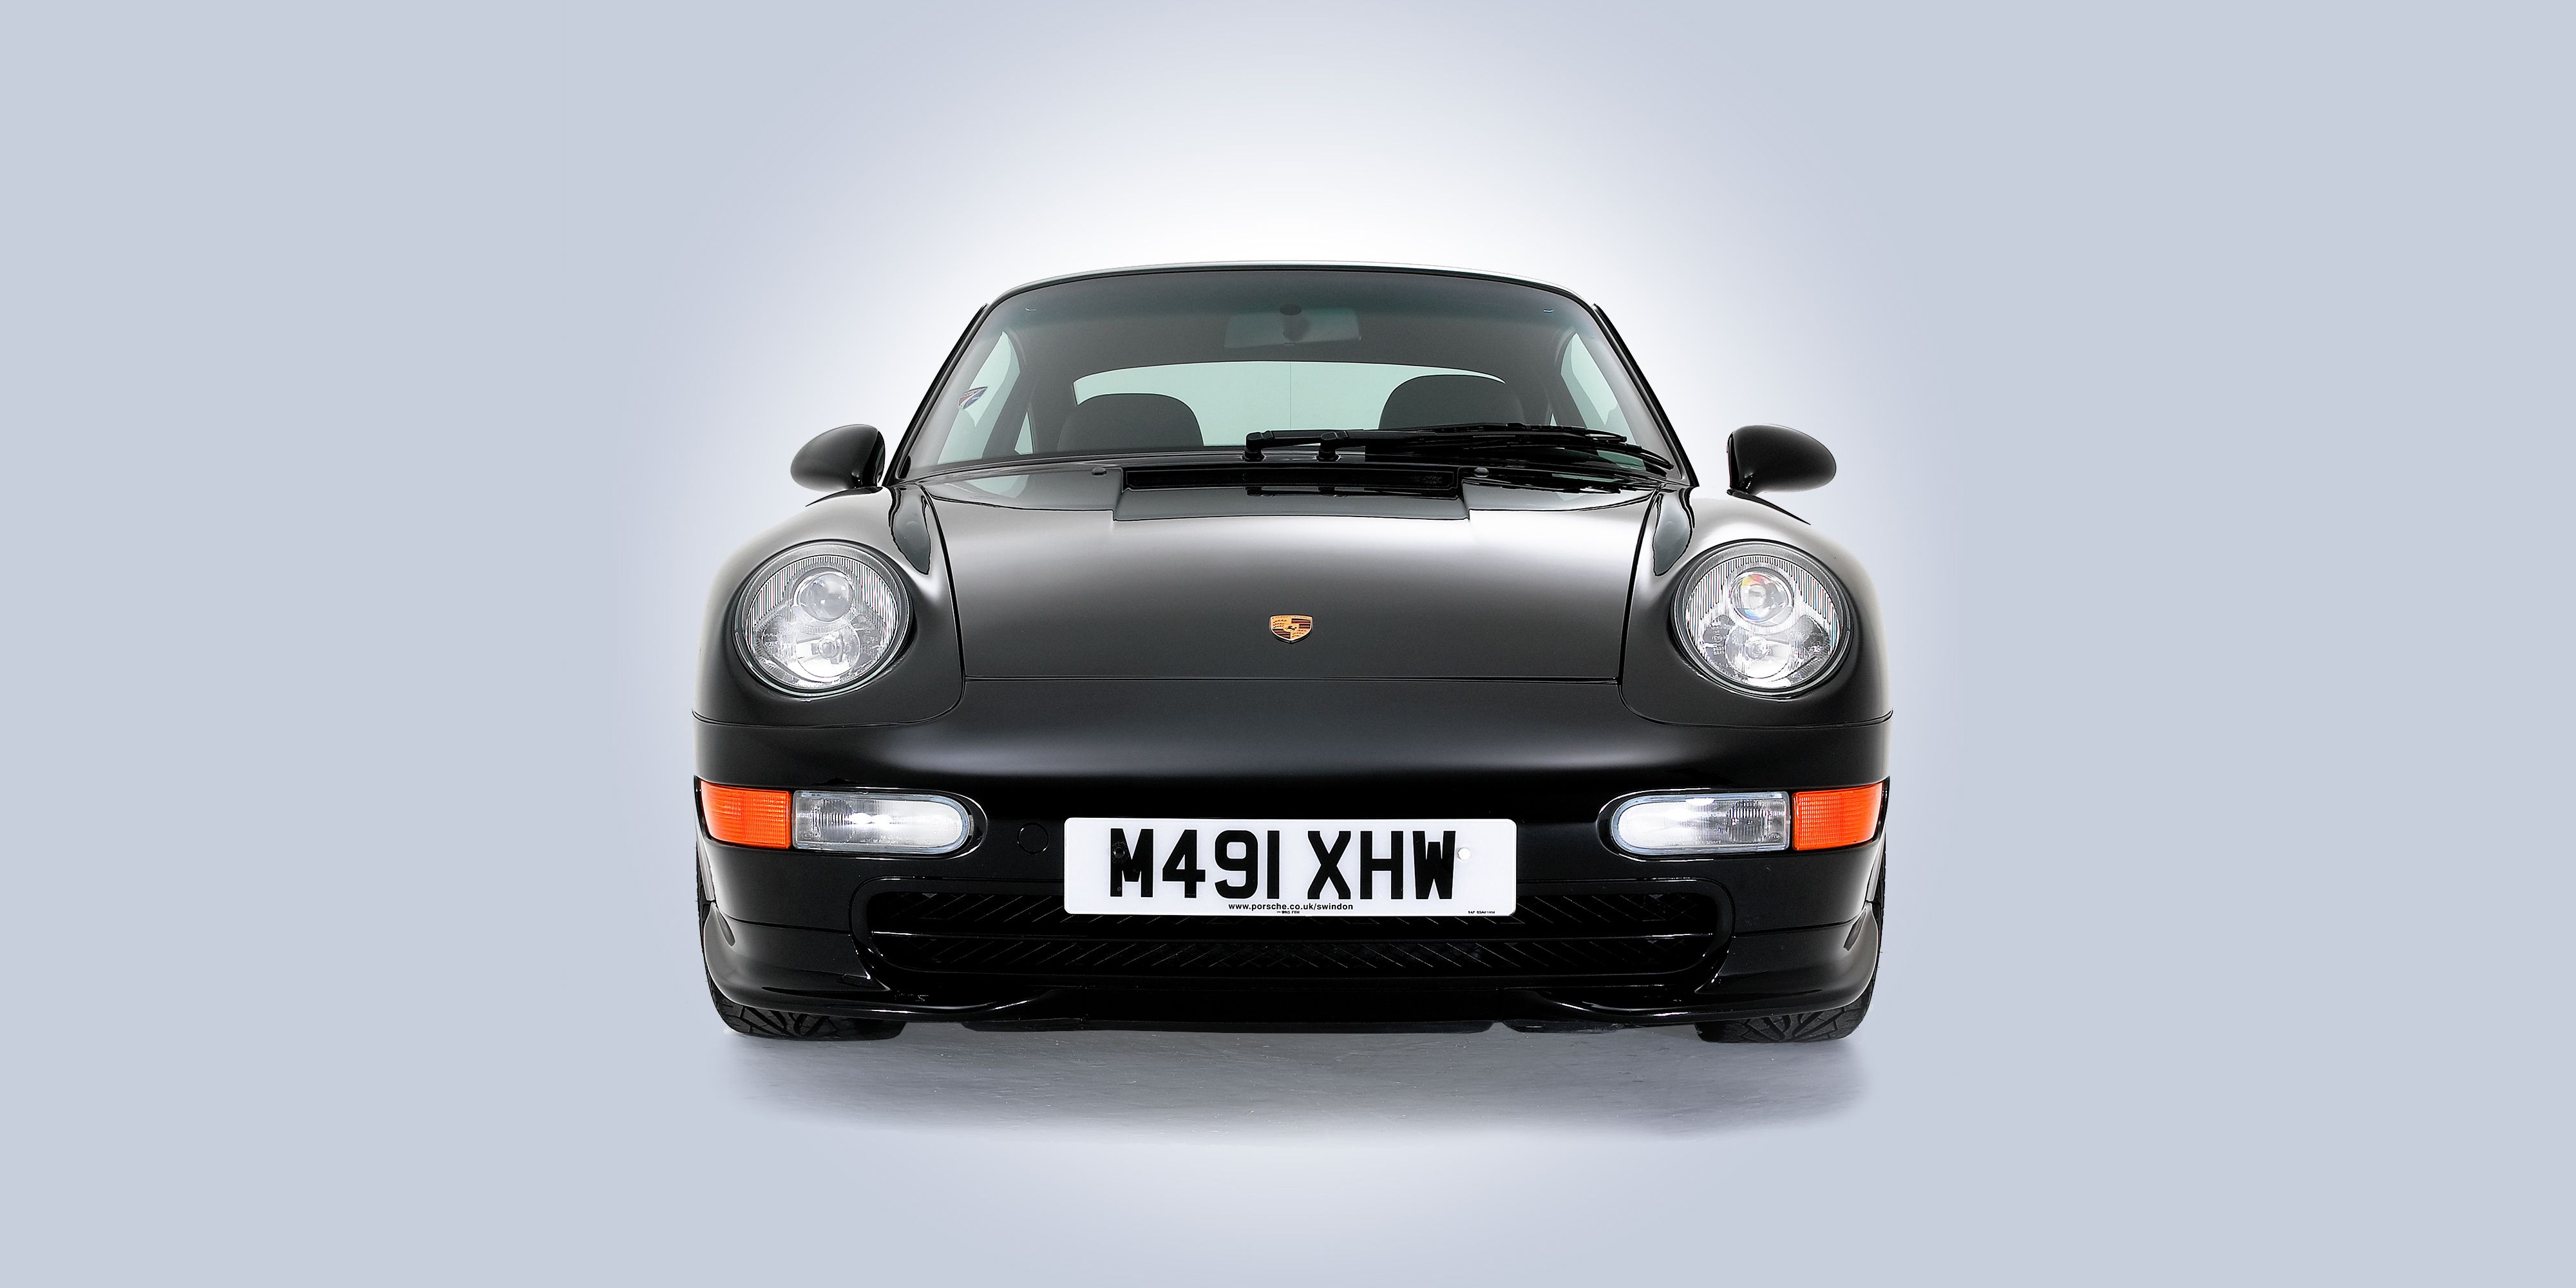 90s Porsche: Iconic Sports Cars from the Era